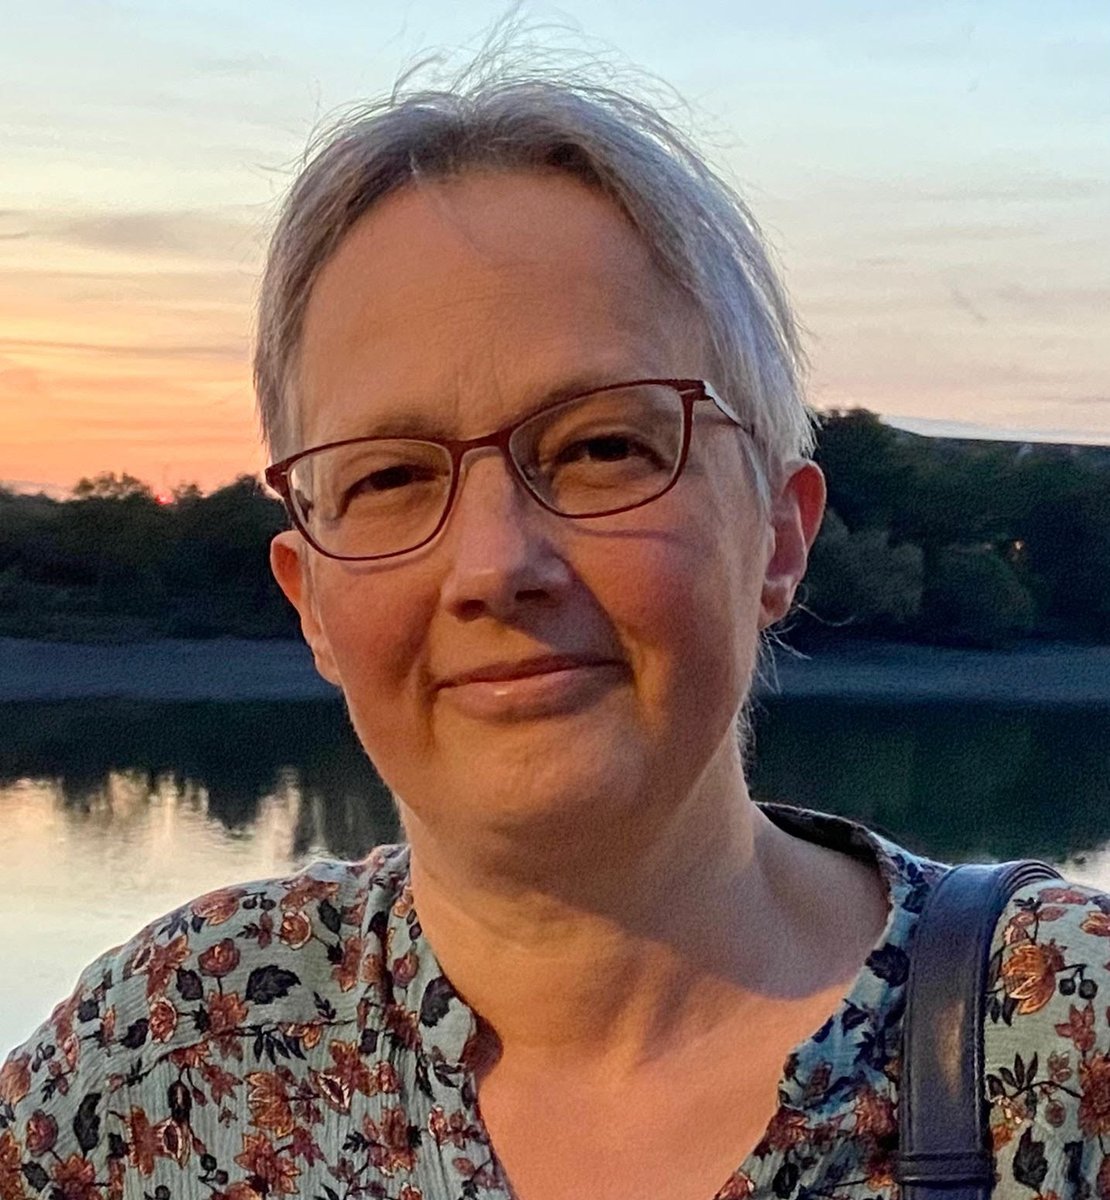 Tributes have been paid to DAUK founding member and past chair Dr Jenny Vaughan. @djnicholl “She had an innate sense of curiosity and a desire to stand up for those without a voice.' @helenfernandes1 “She has touched so many lives in such meaningful and positive ways.'